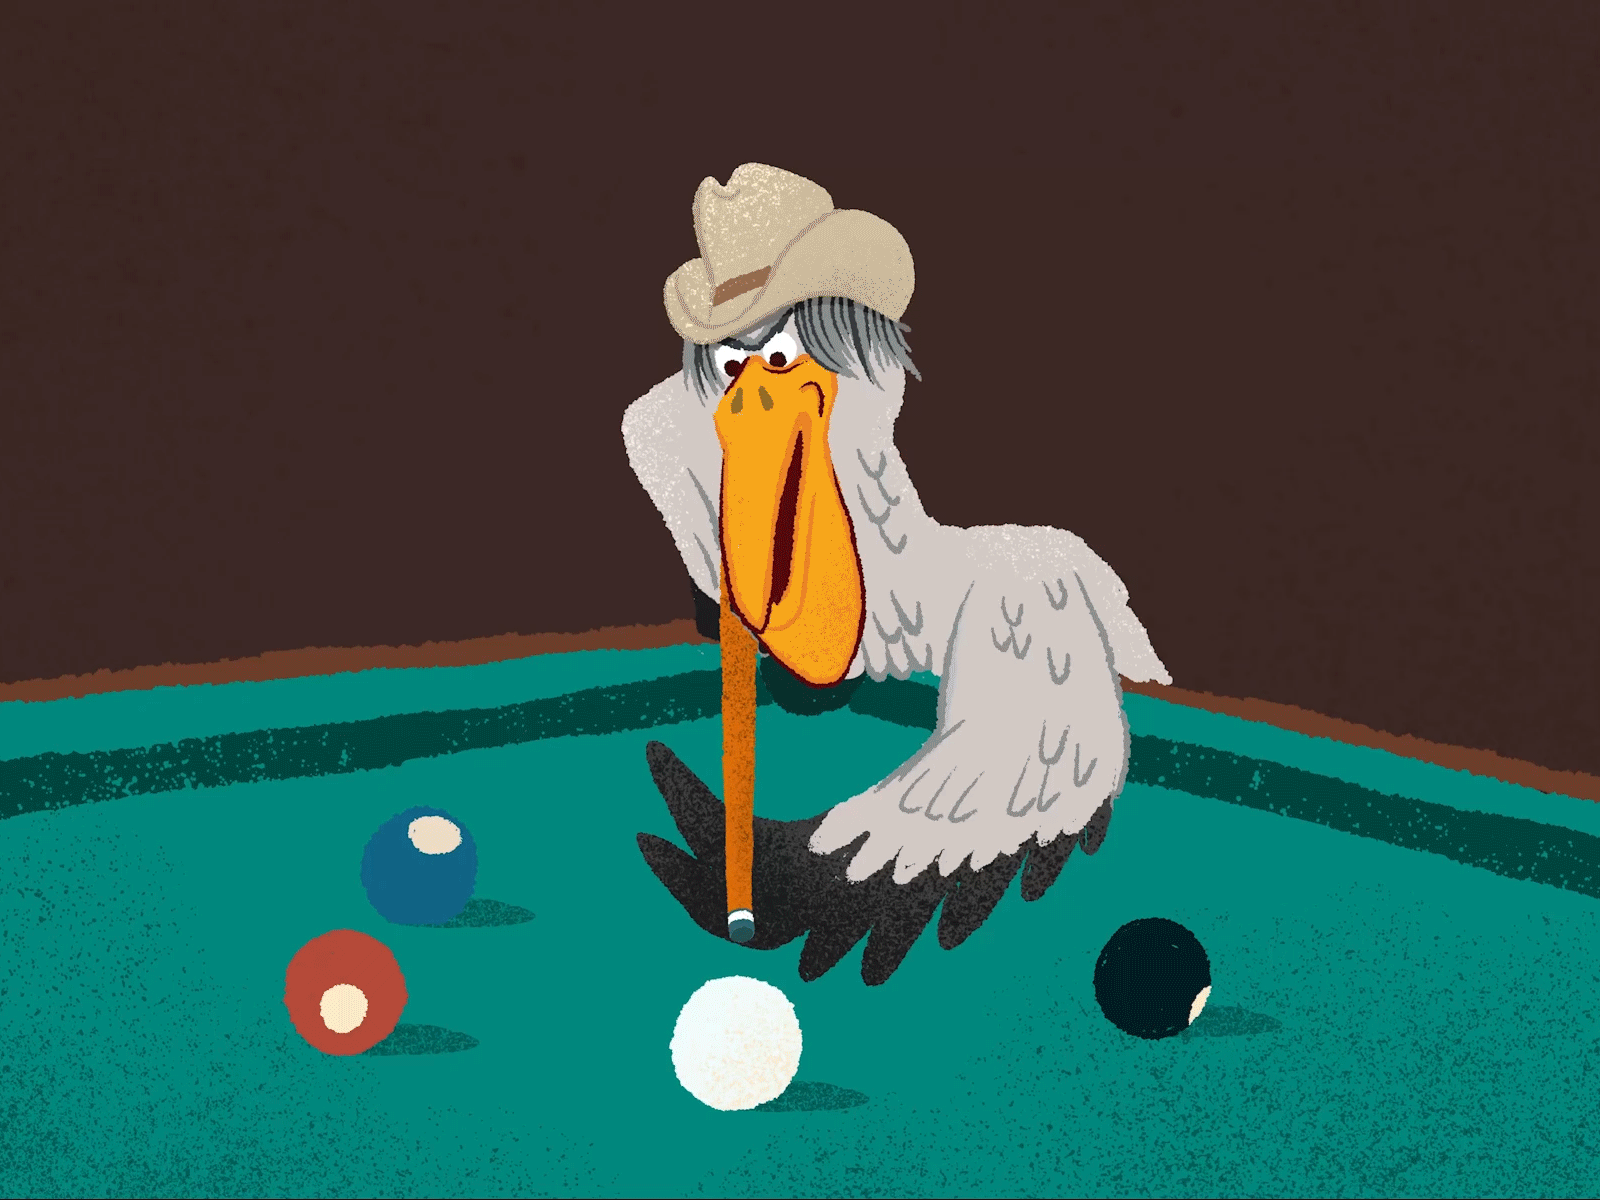 Stork Pool after effects animated short animation billiards cartoon character country music cowboy gif illustration looping gif mograph motion graphics musical pool table procreate stork texture wing